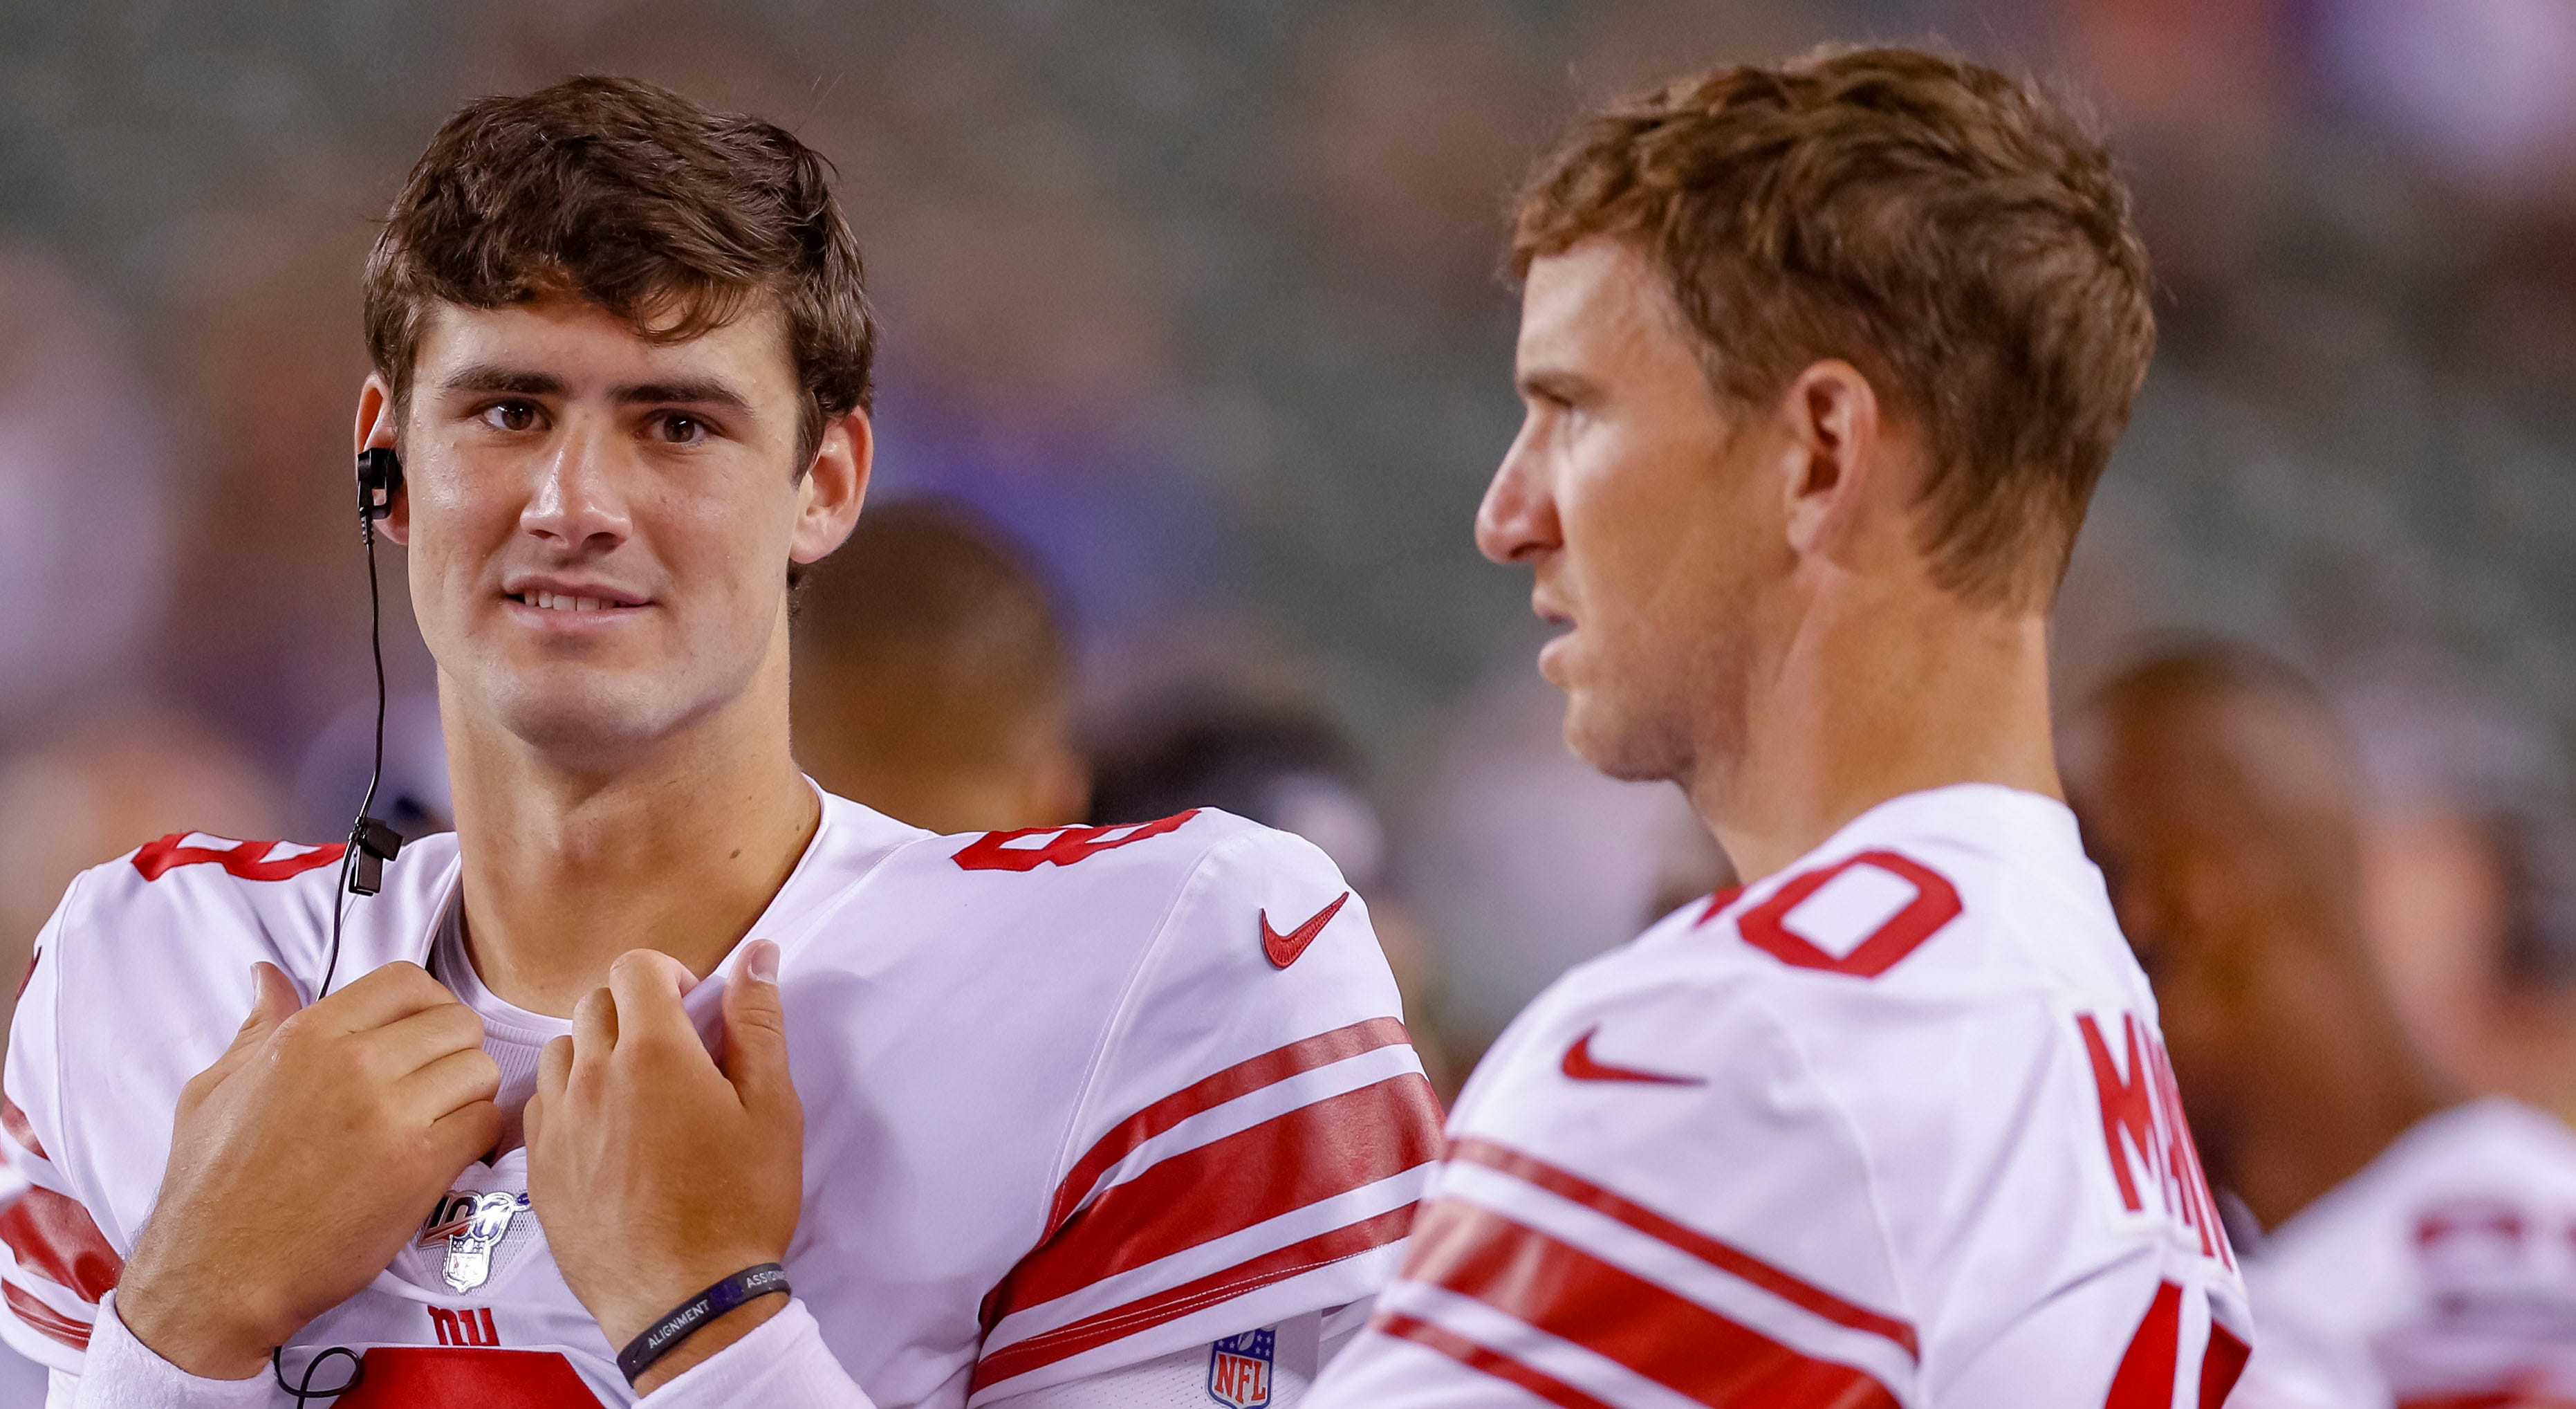 Giants great Eli Manning gives Daniel Jones advice ahead of first career playoff game – Fox News